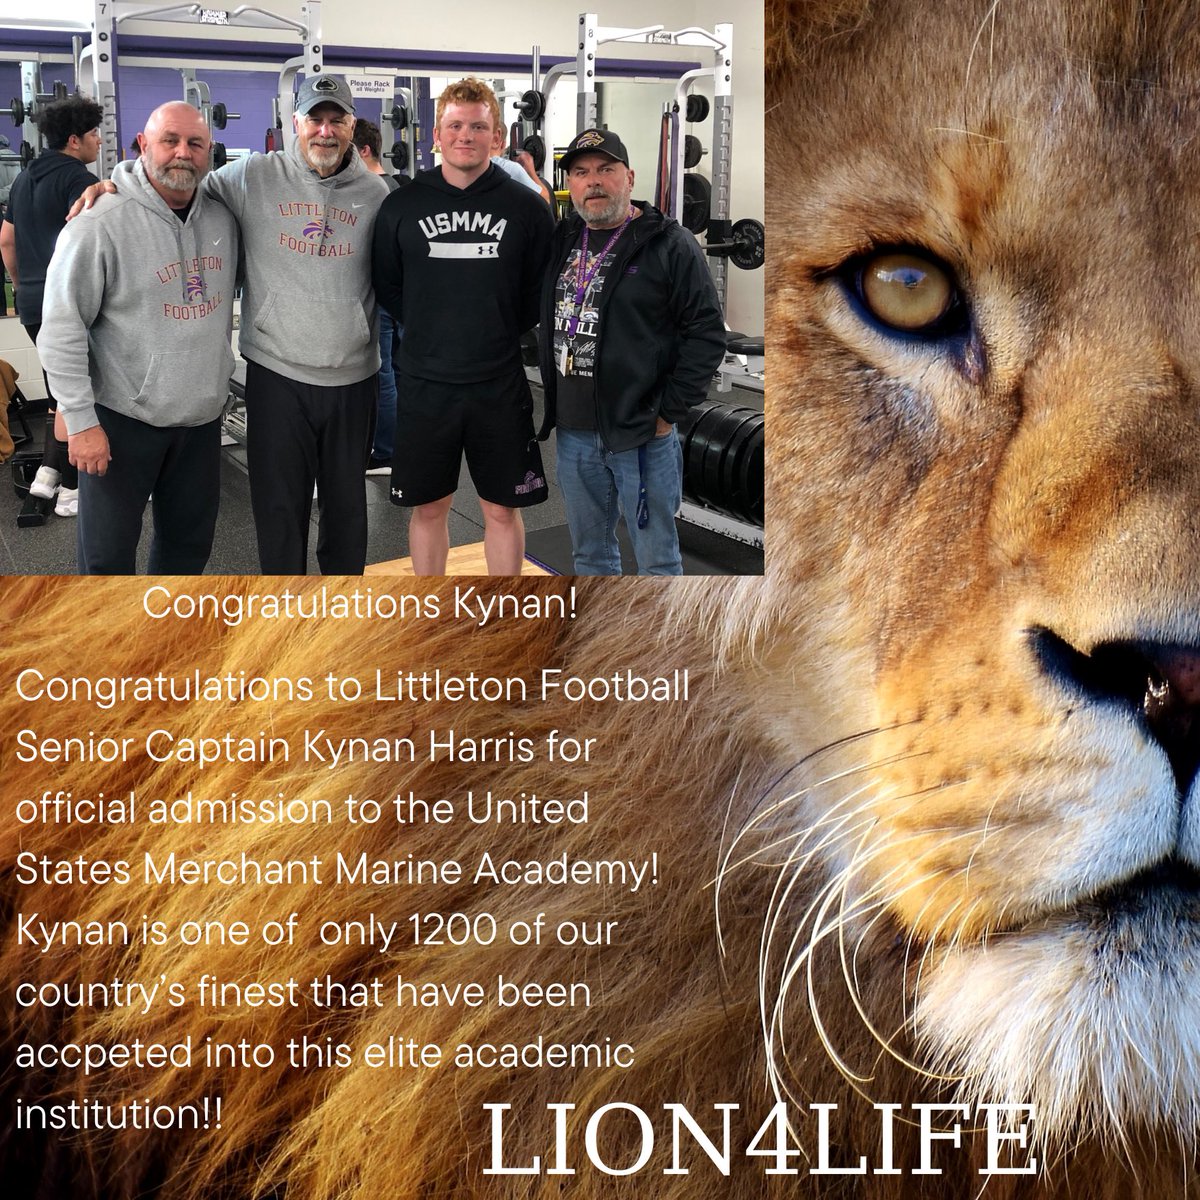 KYNAN HARRIS - LION4LIFE! Stands Tall as one of only 1200 of our country’s elite to be accepted in the USMMA!